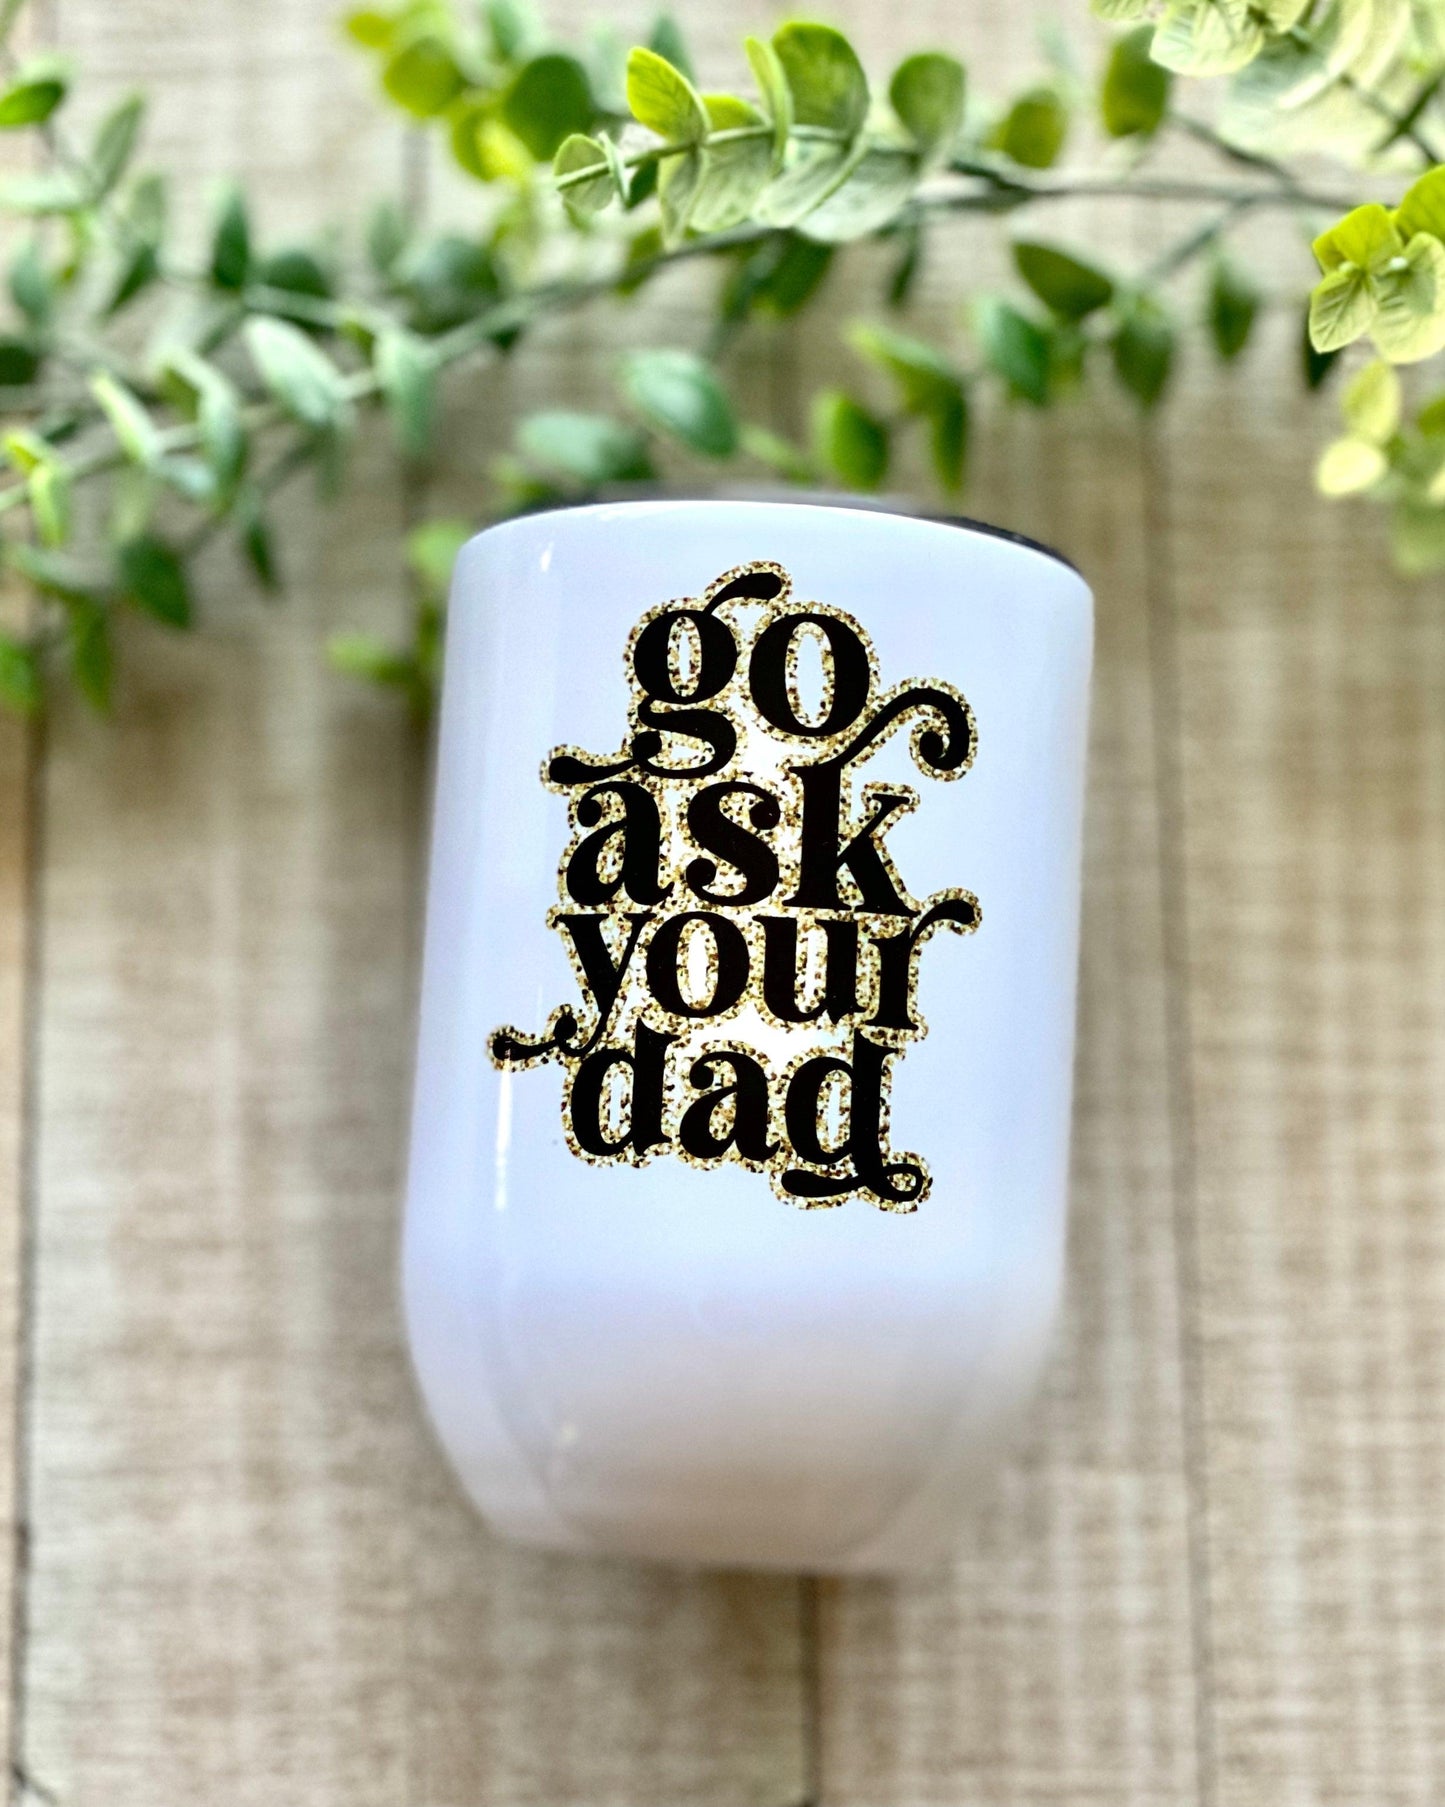 Go Ask Your Dad - 12oz Wine Tumbler - Stainless Steel Tumbler -  Rustic Cuts